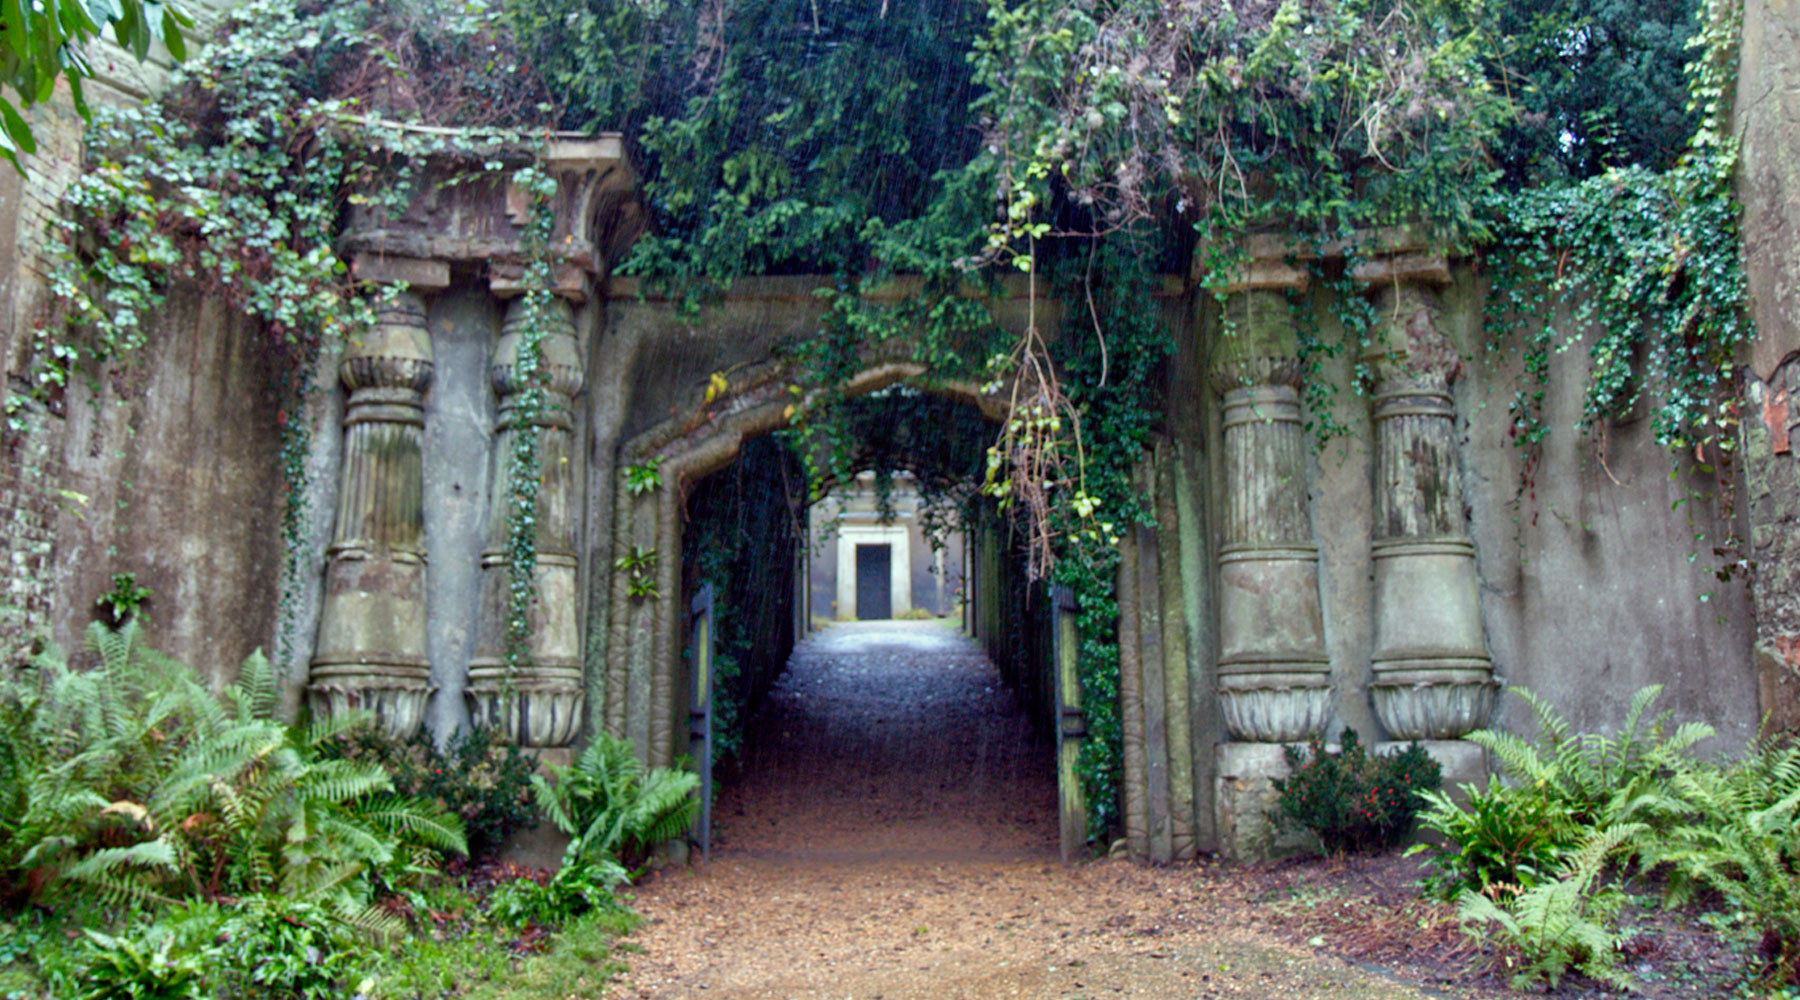 Highgate Cemetery will be open to visit between Christmas and New Year